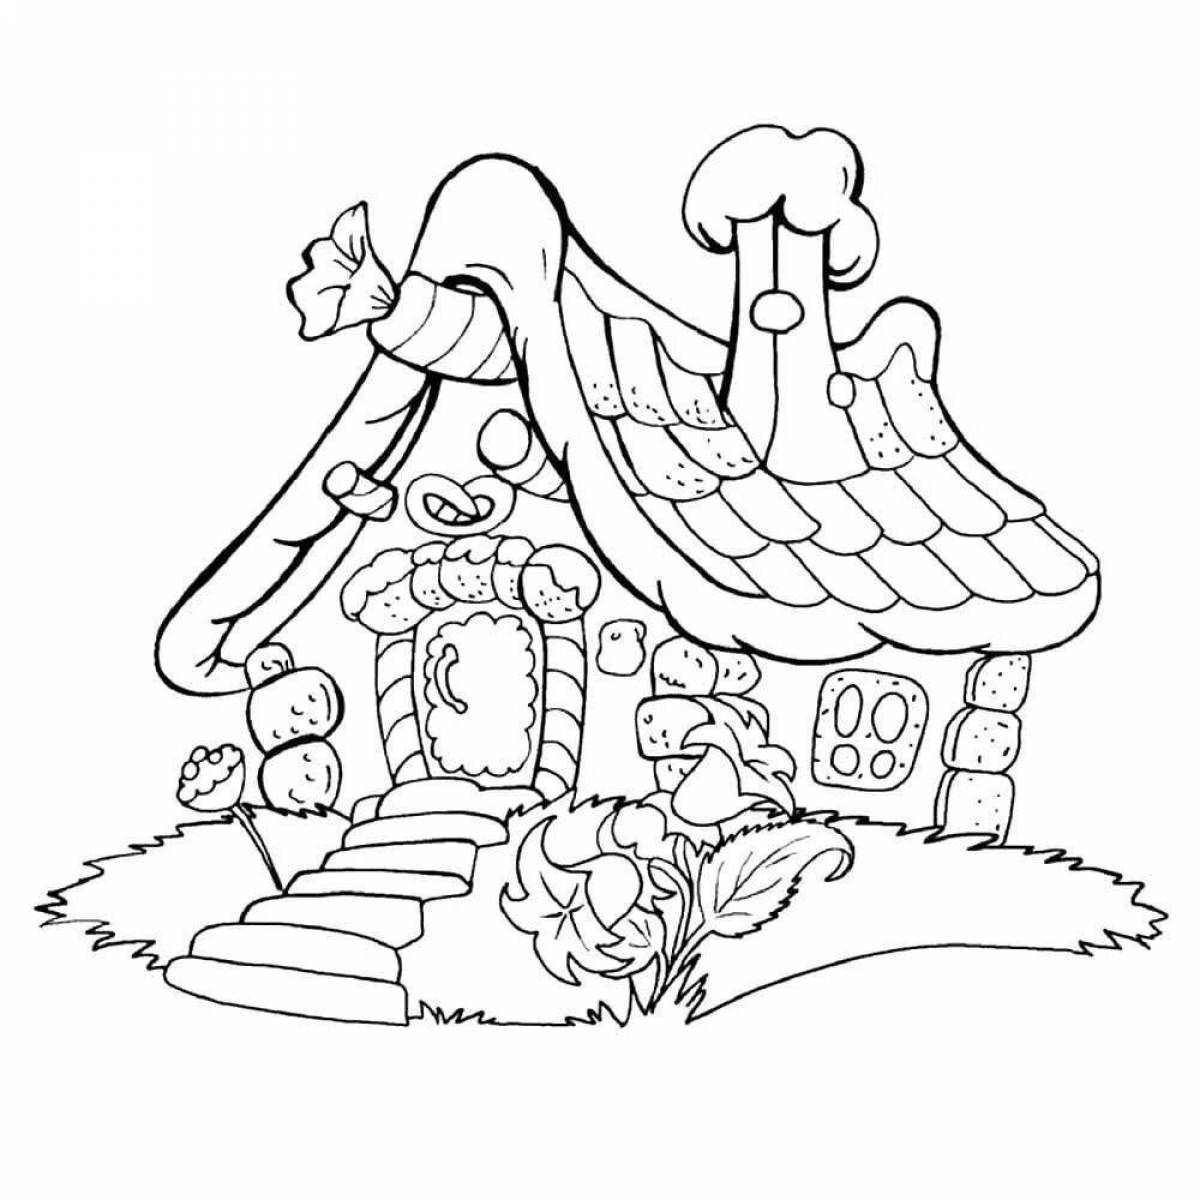 Unique fairytale gingerbread house coloring page